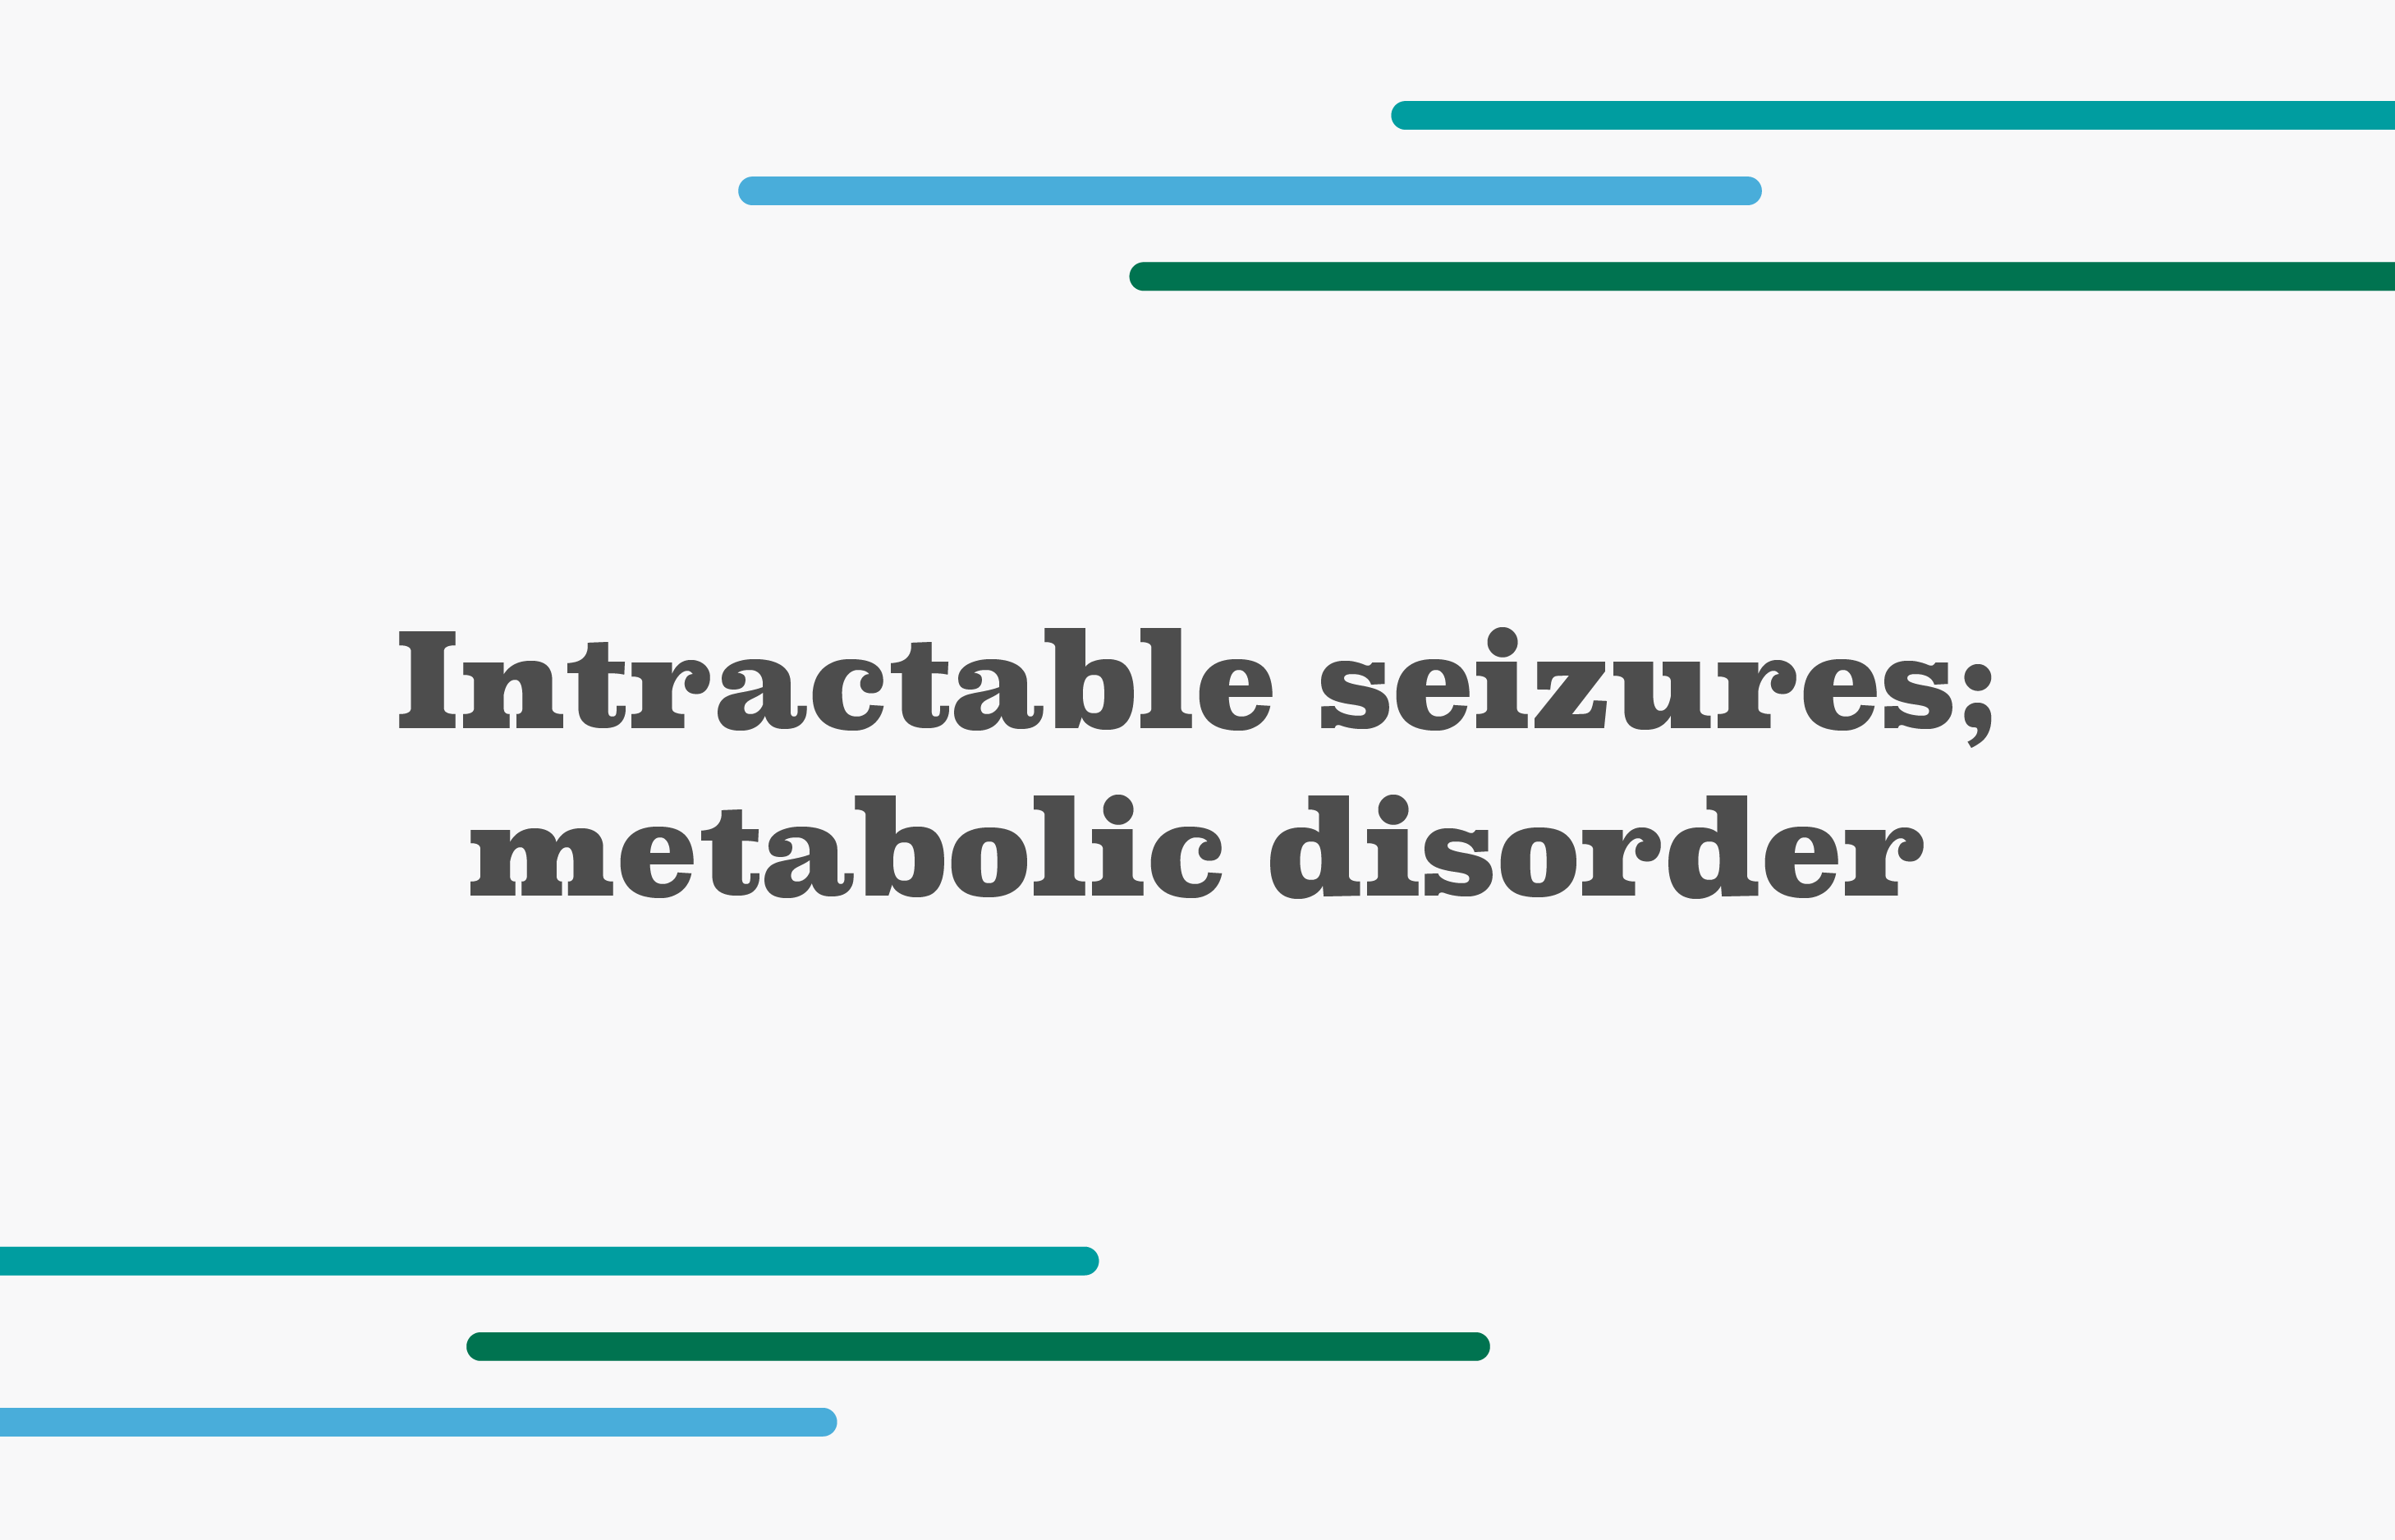 Intractable seizures; metabolic disorder